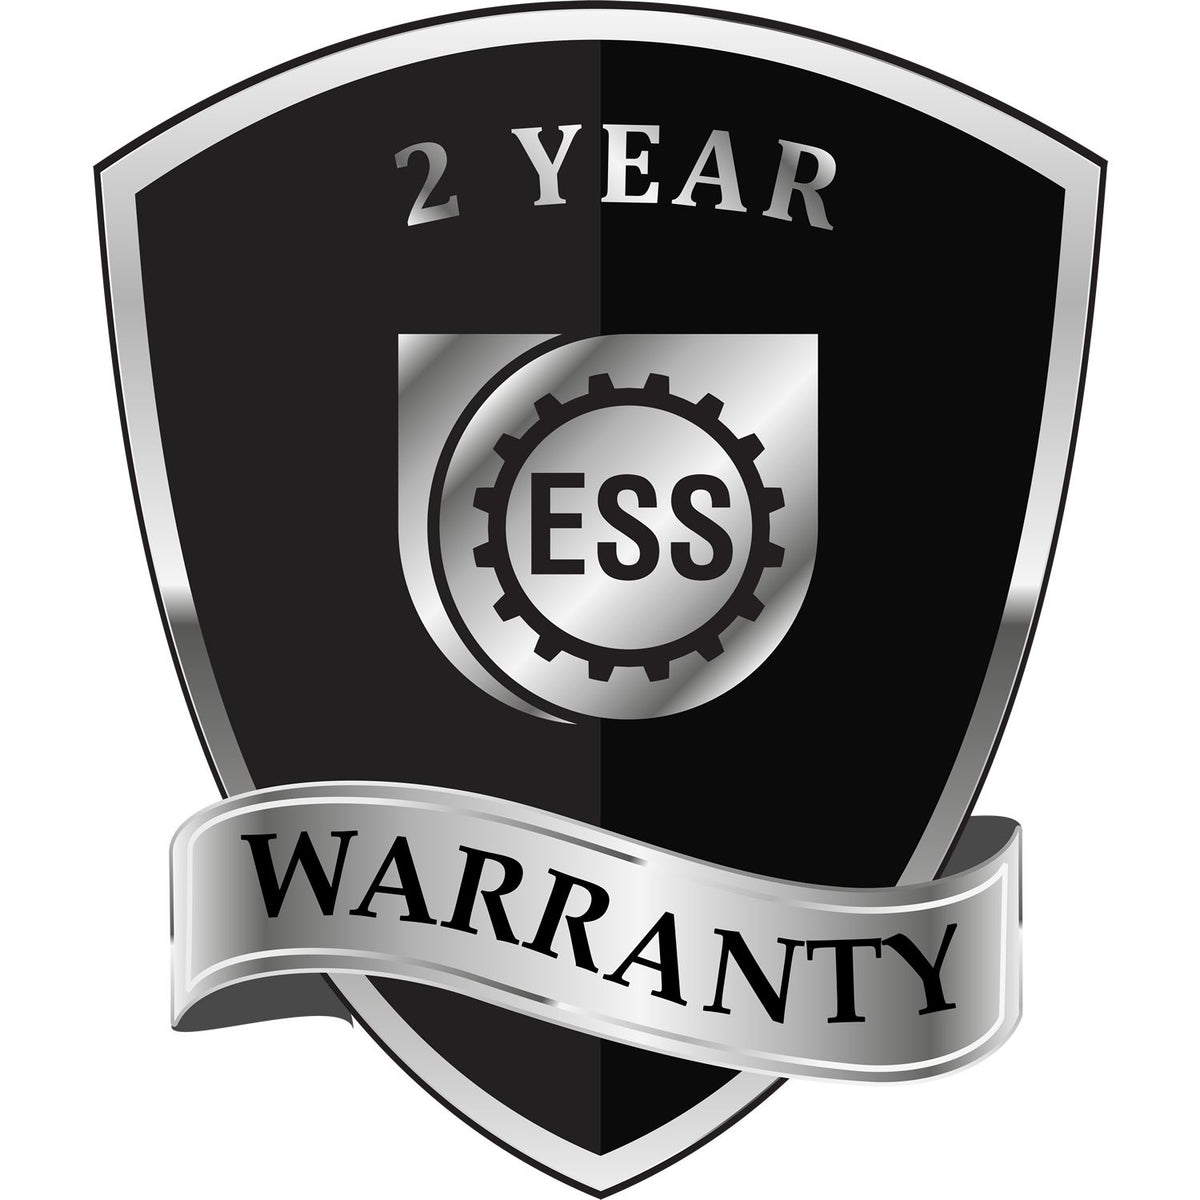 A badge or emblem showing a warranty icon for the Extended Long Reach Indiana Surveyor Embosser